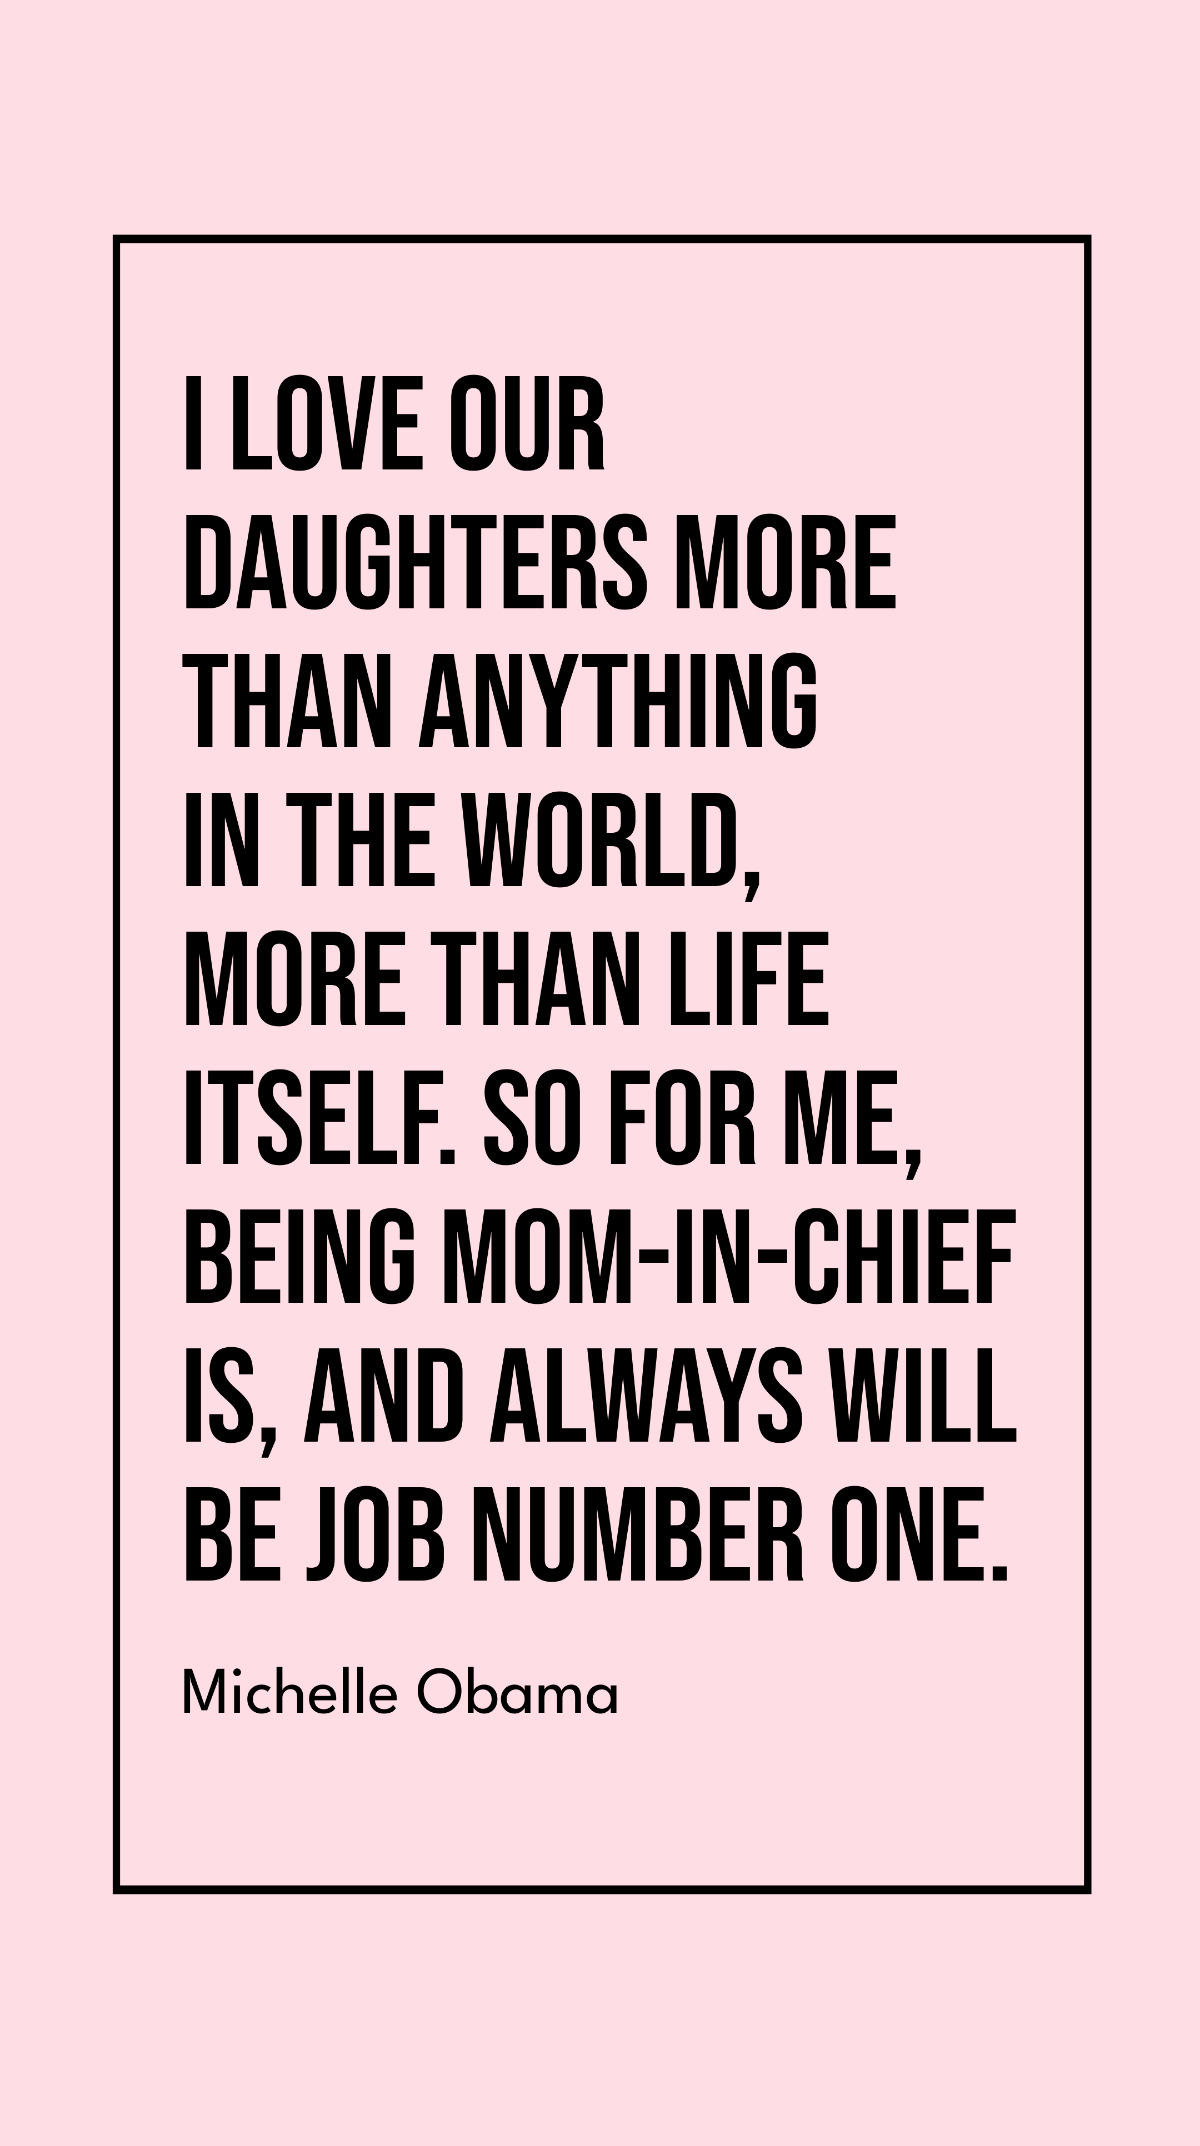 Michelle Obama - I love our daughters more than anything in the world, more than life itself. So for me, being Mom-in-Chief is, and always will be job number one. Template